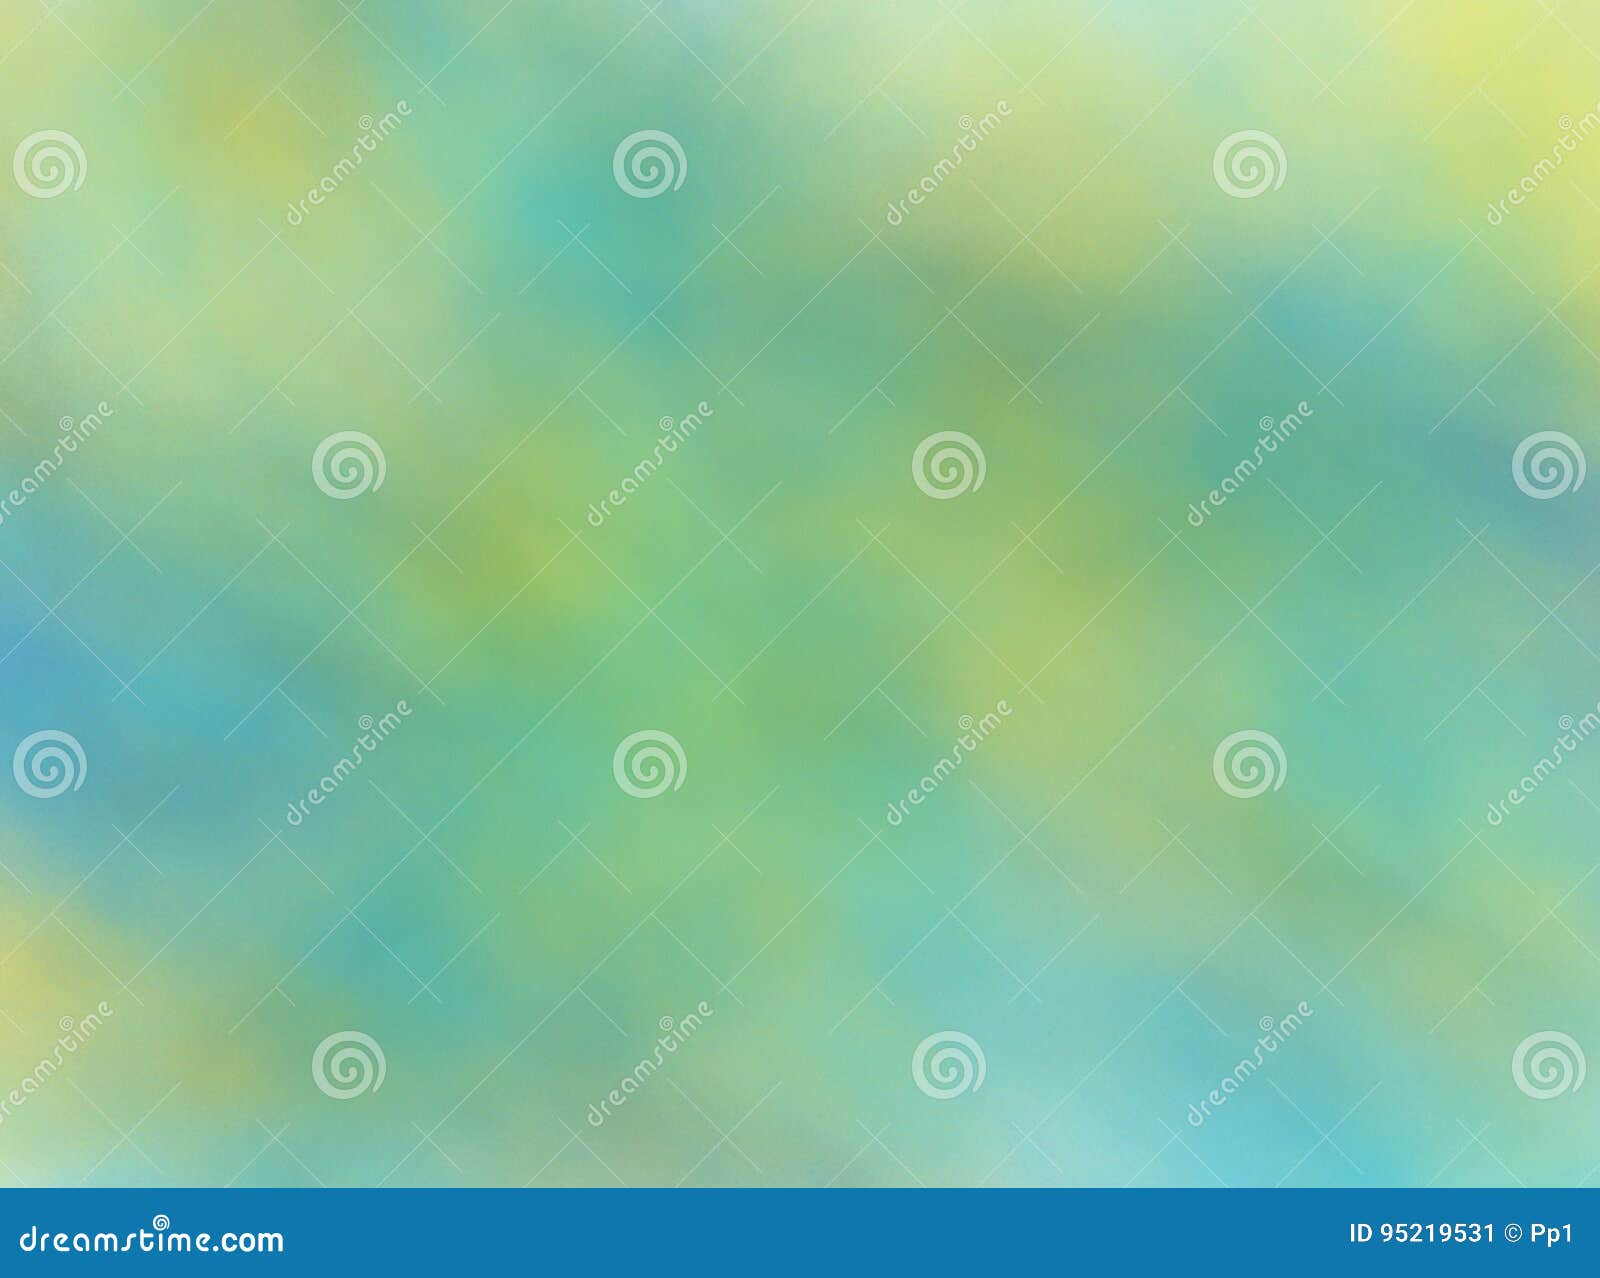 Abstract Pastel Blue Green Color Background Texture Stock Image - Image ...